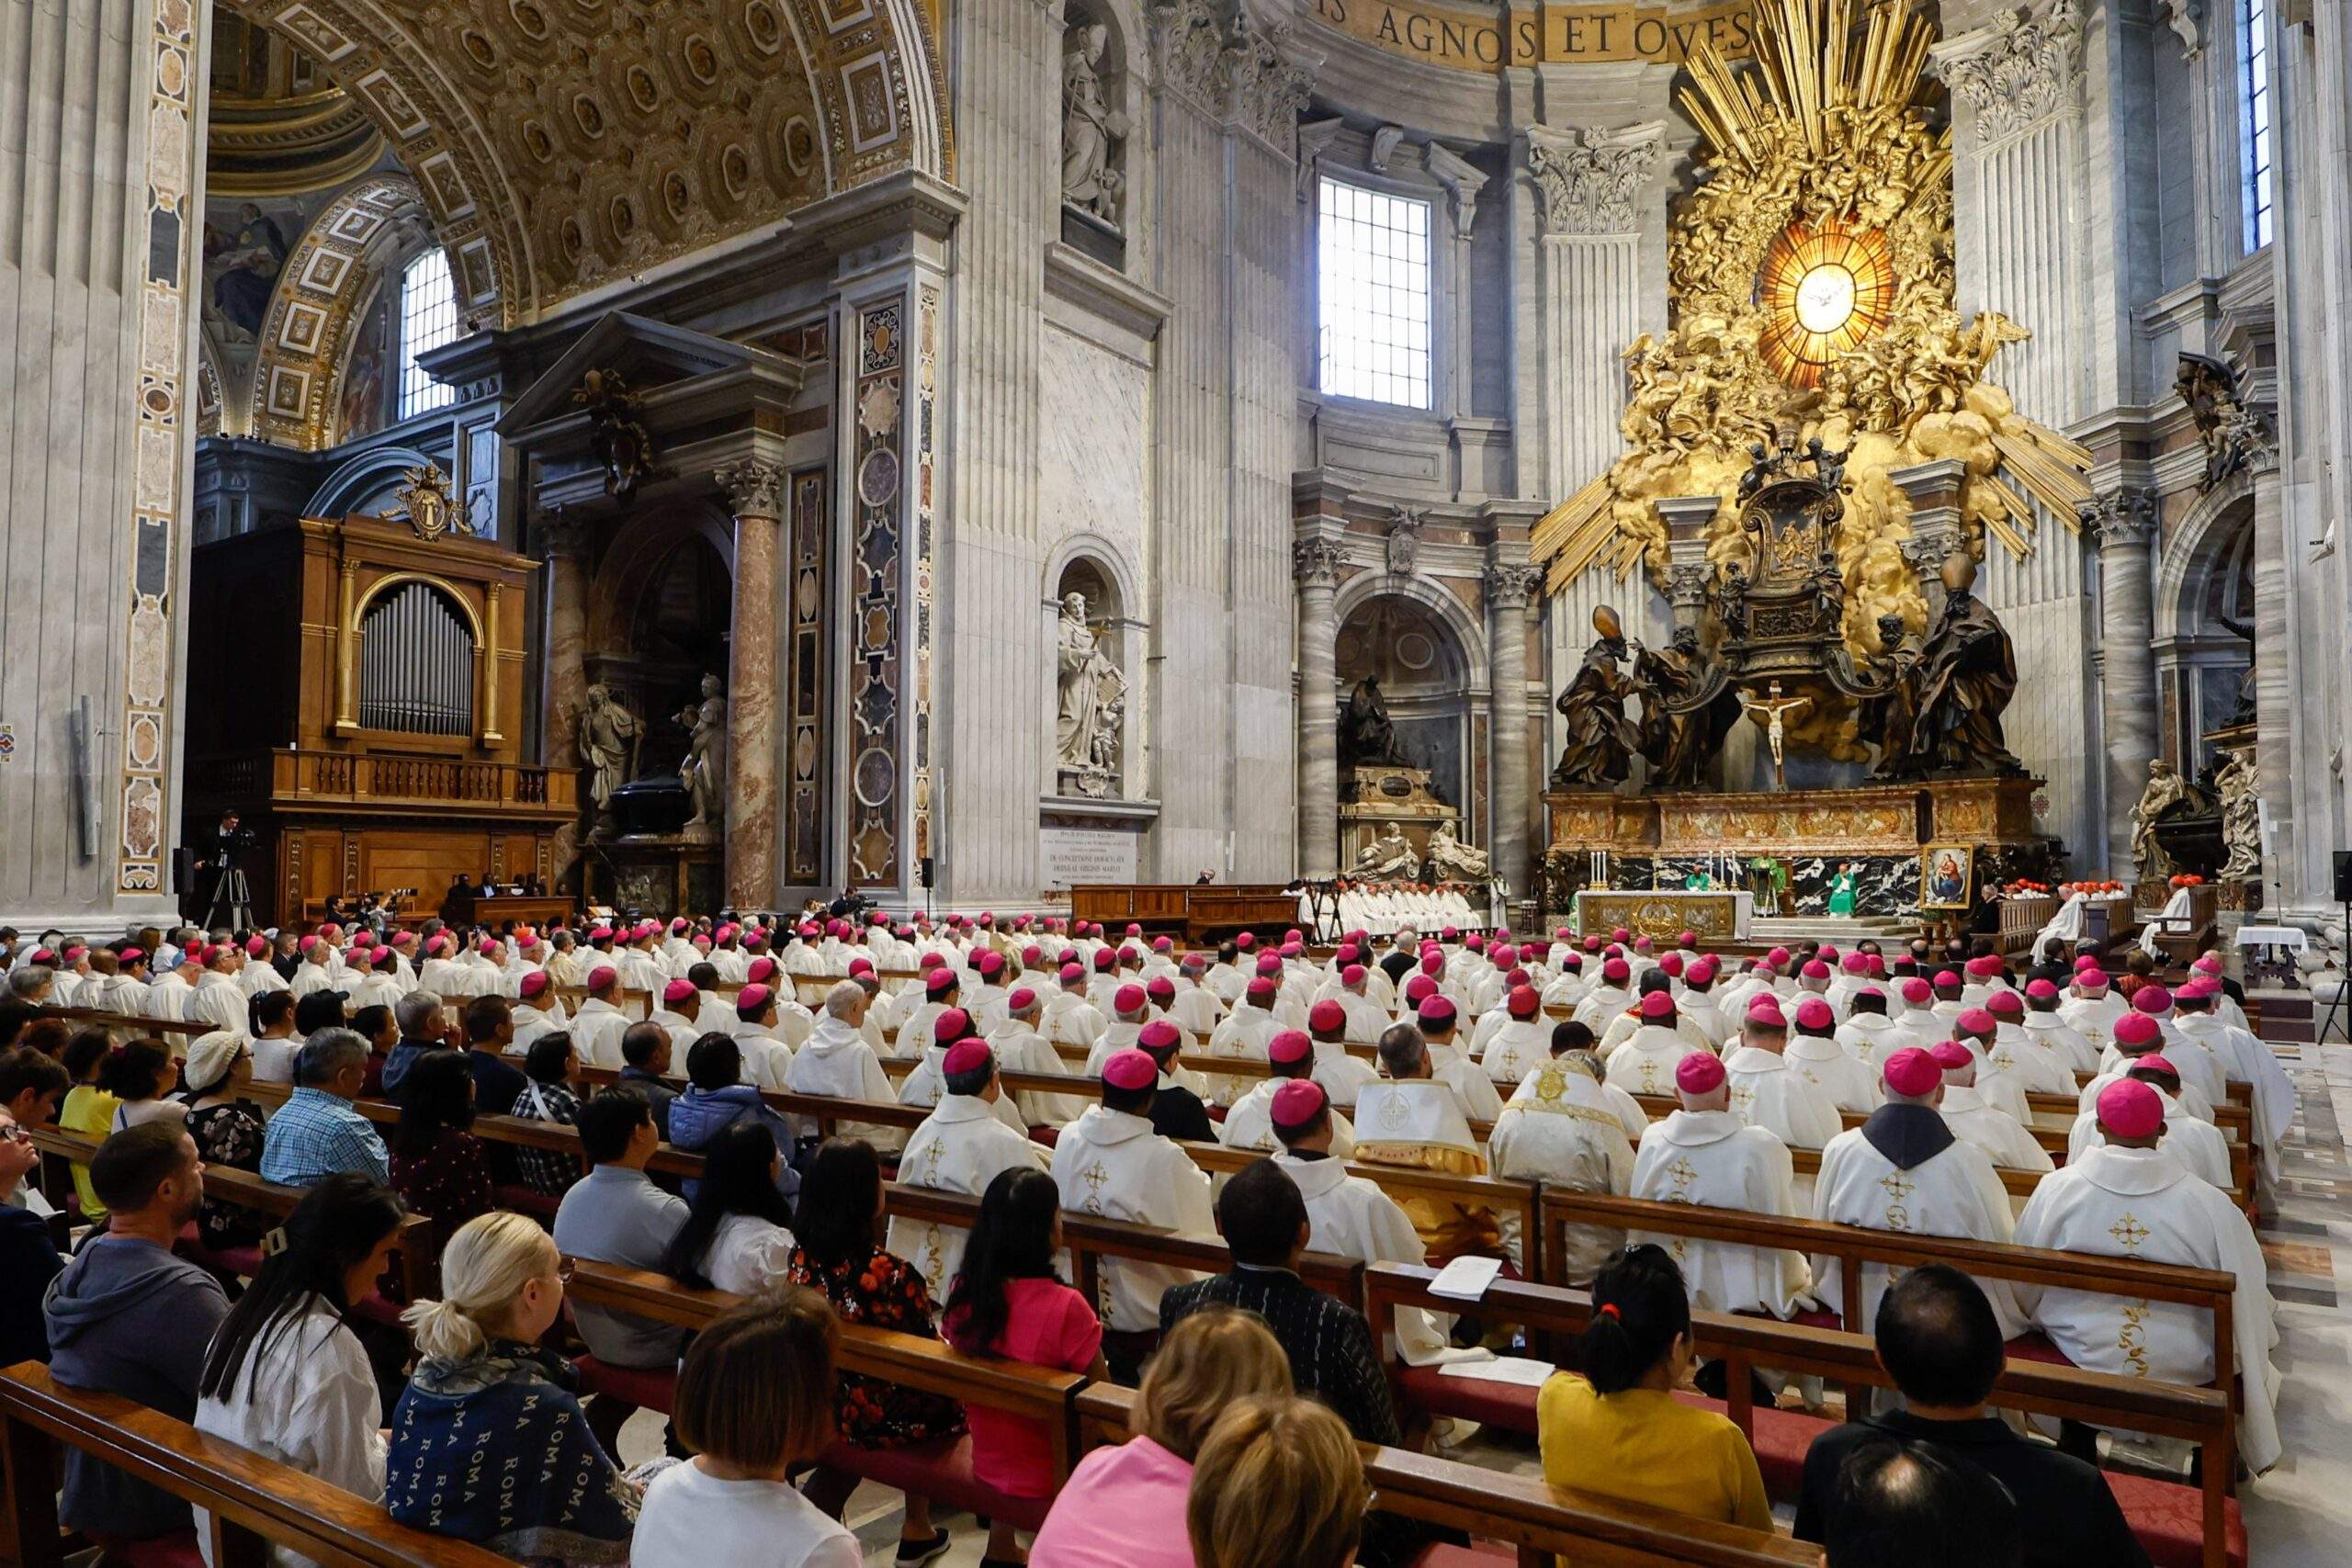 Participants in the assembly of the Synod of Bishops attend Mass presided over by Congolese Cardinal Fridolin Ambongo of Kinshasa at the Altar of the Chair in St. Peter's Basilica at the Vatican Oct. 13, 2023. (CNS photo/Lola Gomez)